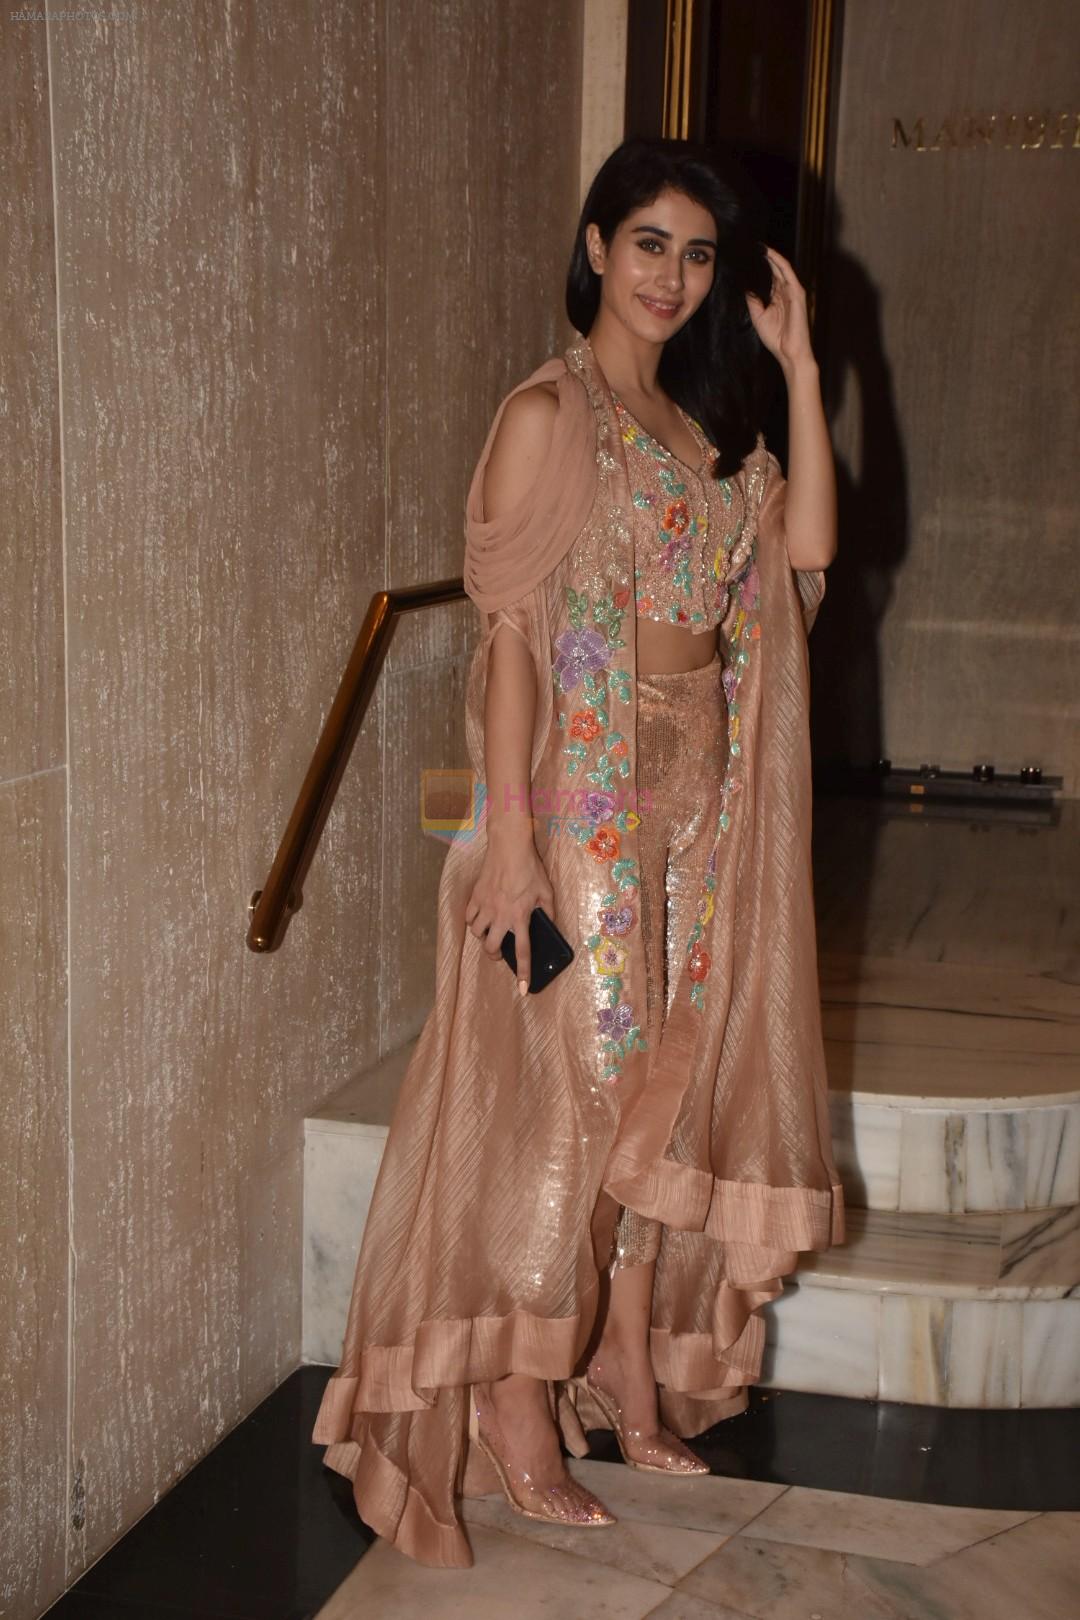 Warina Hussain at Manish Malhotra's party at his home in bandra on 20th Aug 2019